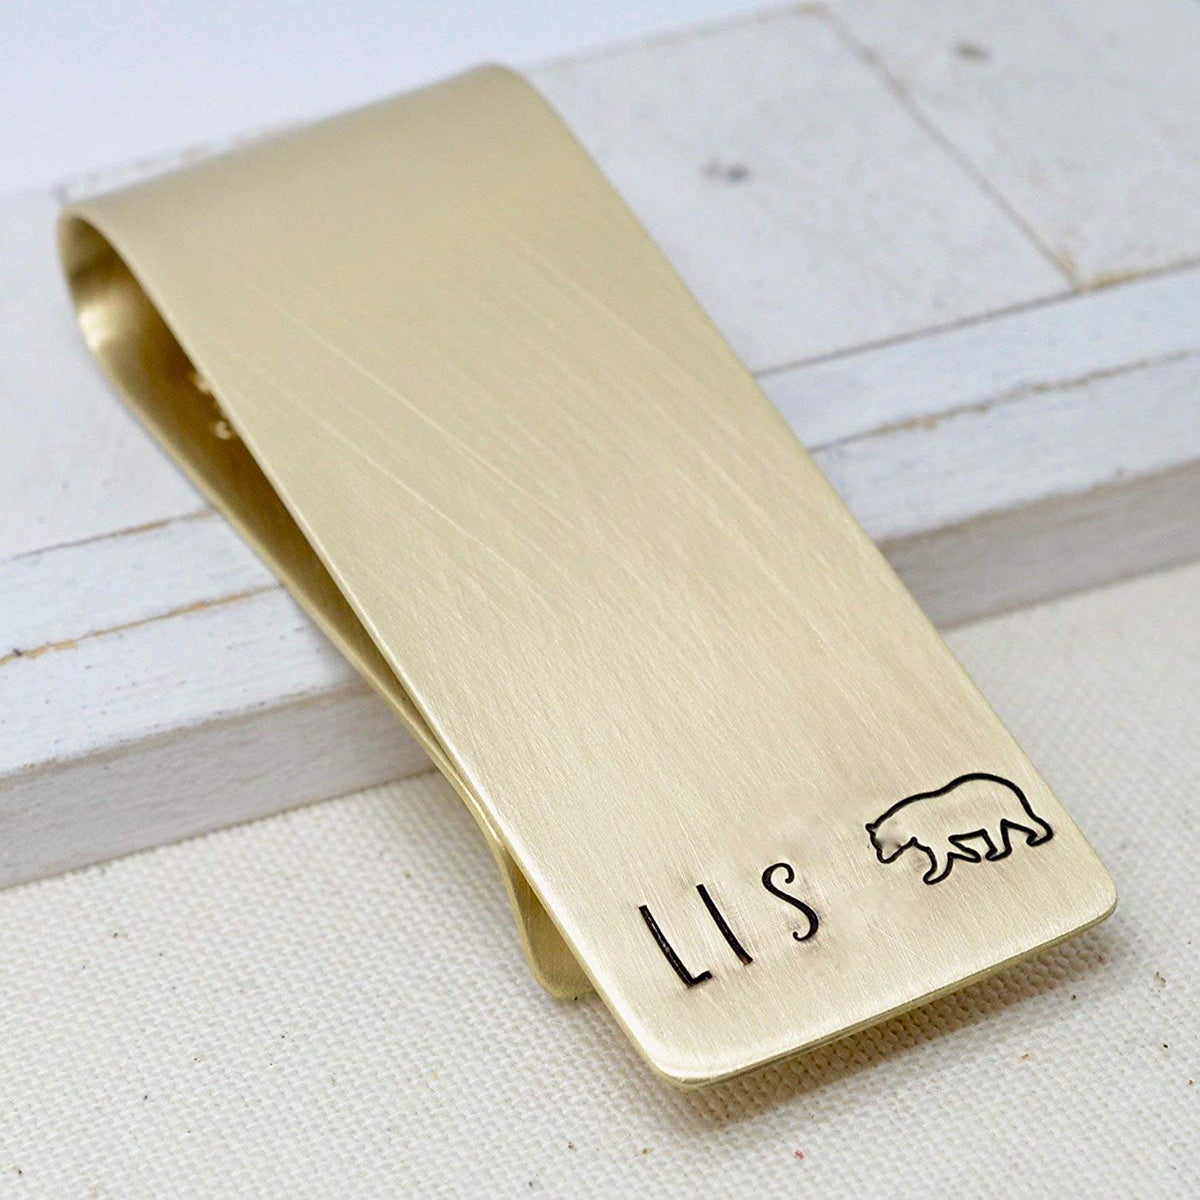 Papa Bear Custom Brass Money Clip Wallet - Engraved with Message from Kids - Bear Claw Gift for Dad - Love It Personalized